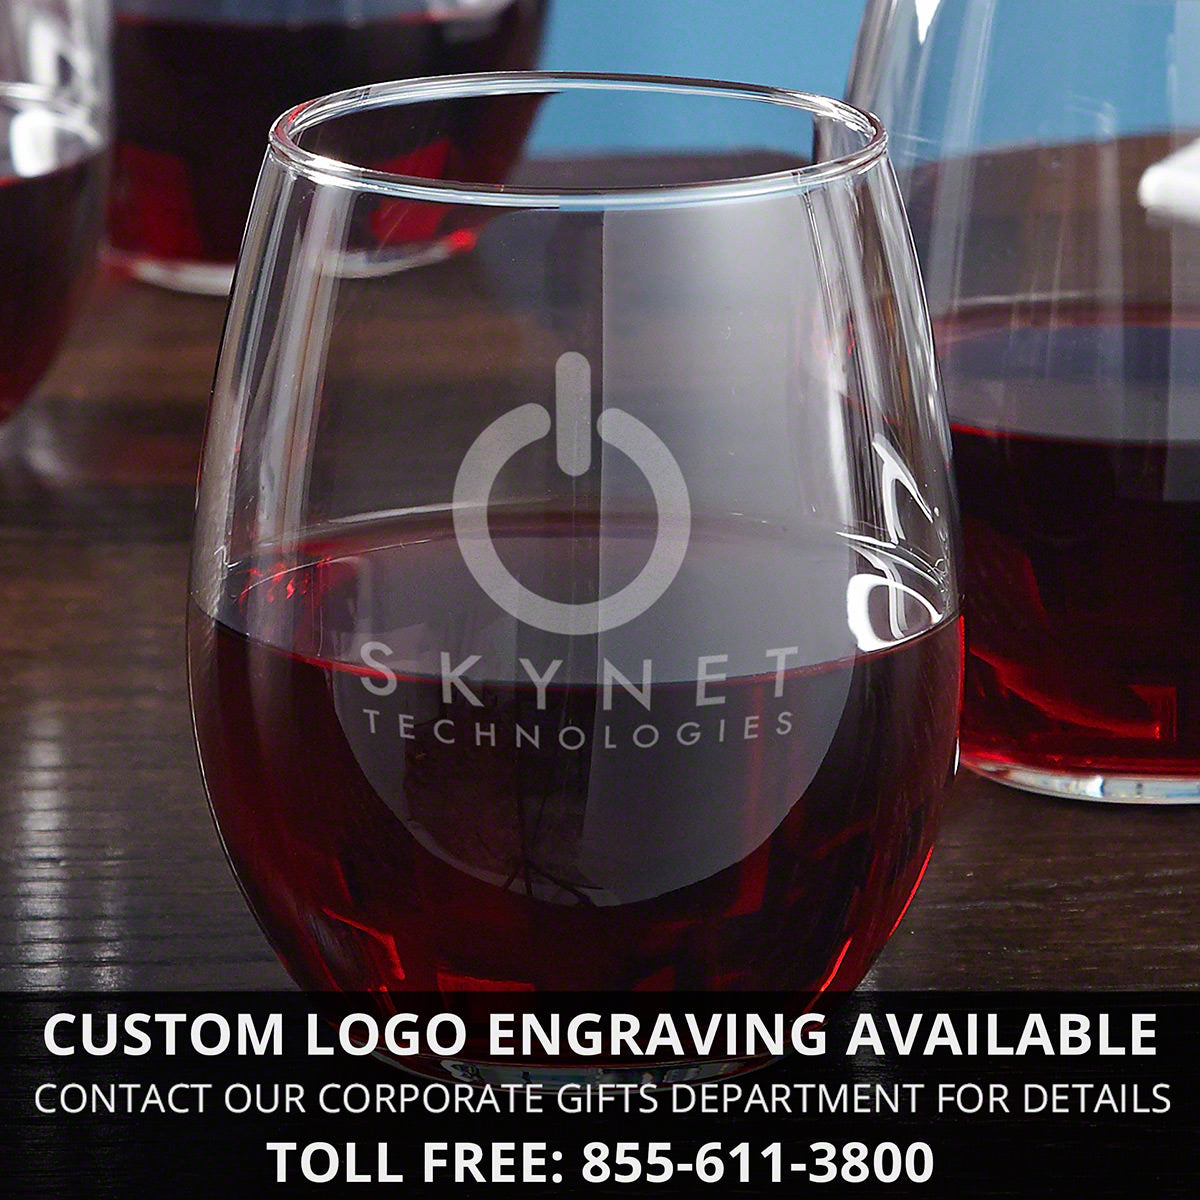 Personalized Wine Decanter and Glasses - Gift for Wine Lovers